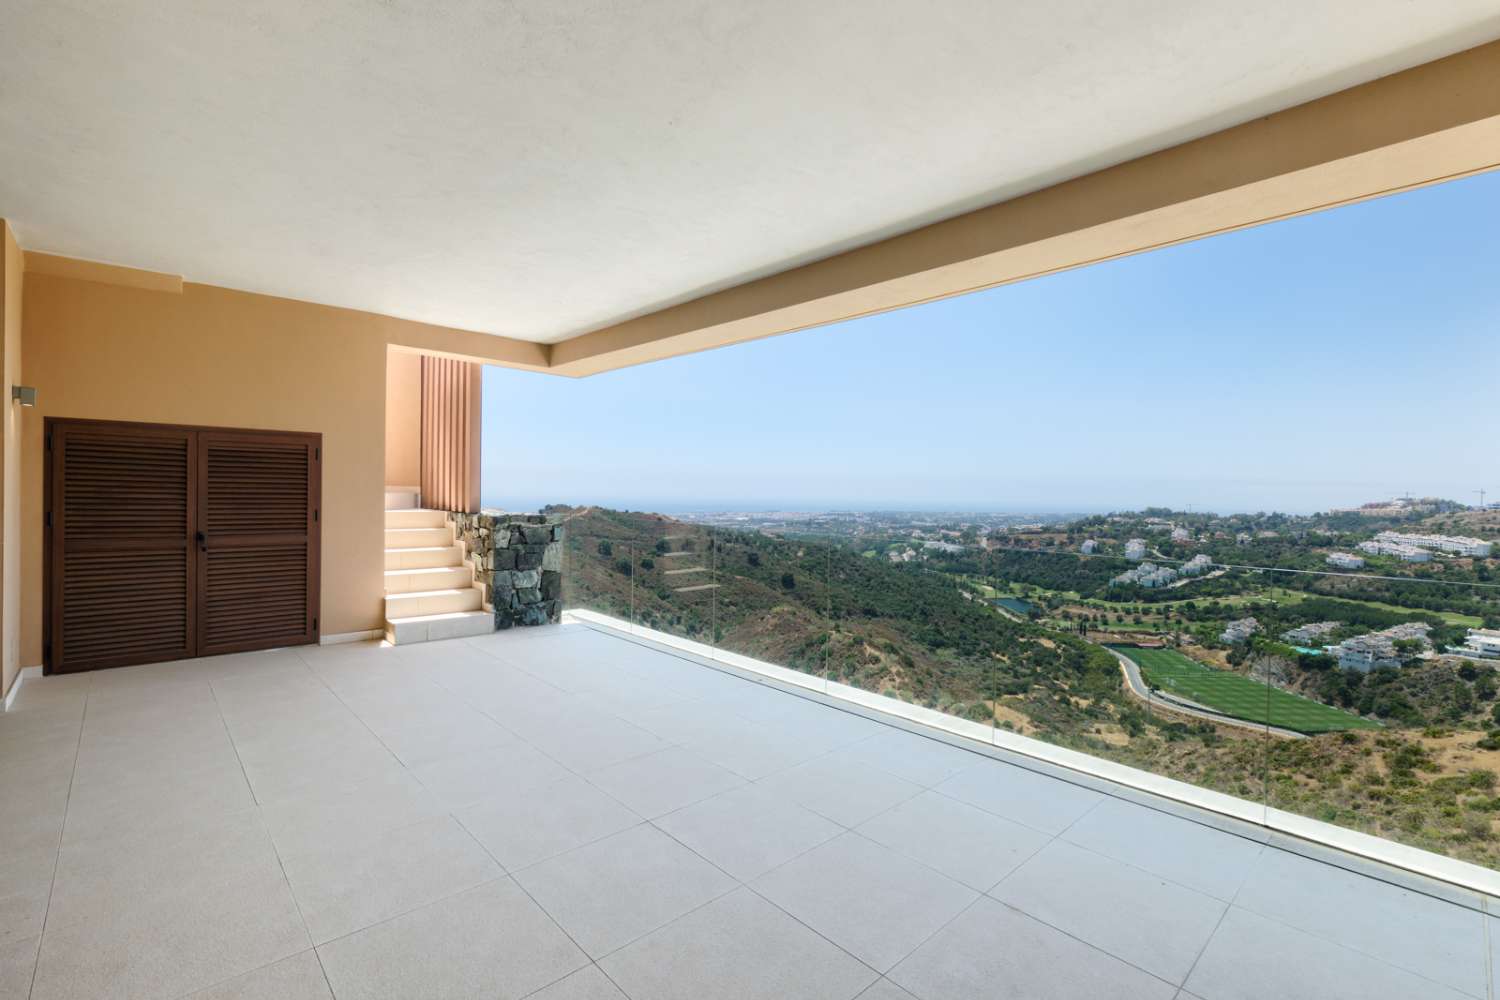 SOLD! BEAUTIFUL BRAND NEW PENTHOUSE IN REAL DE LA QUINTA